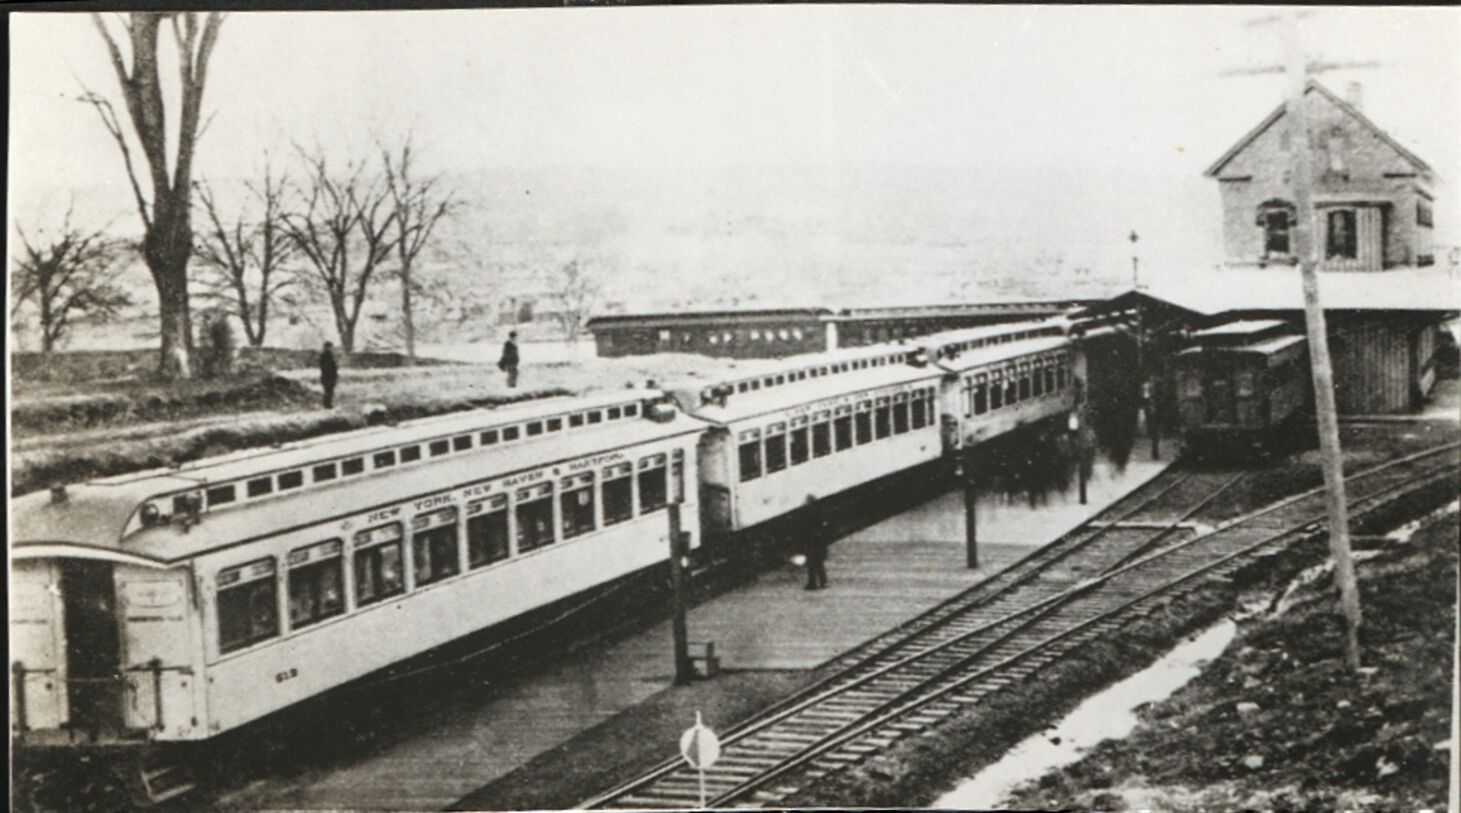 New York and New England Railroad White Train at the Middletown, Connecticut, railroad station